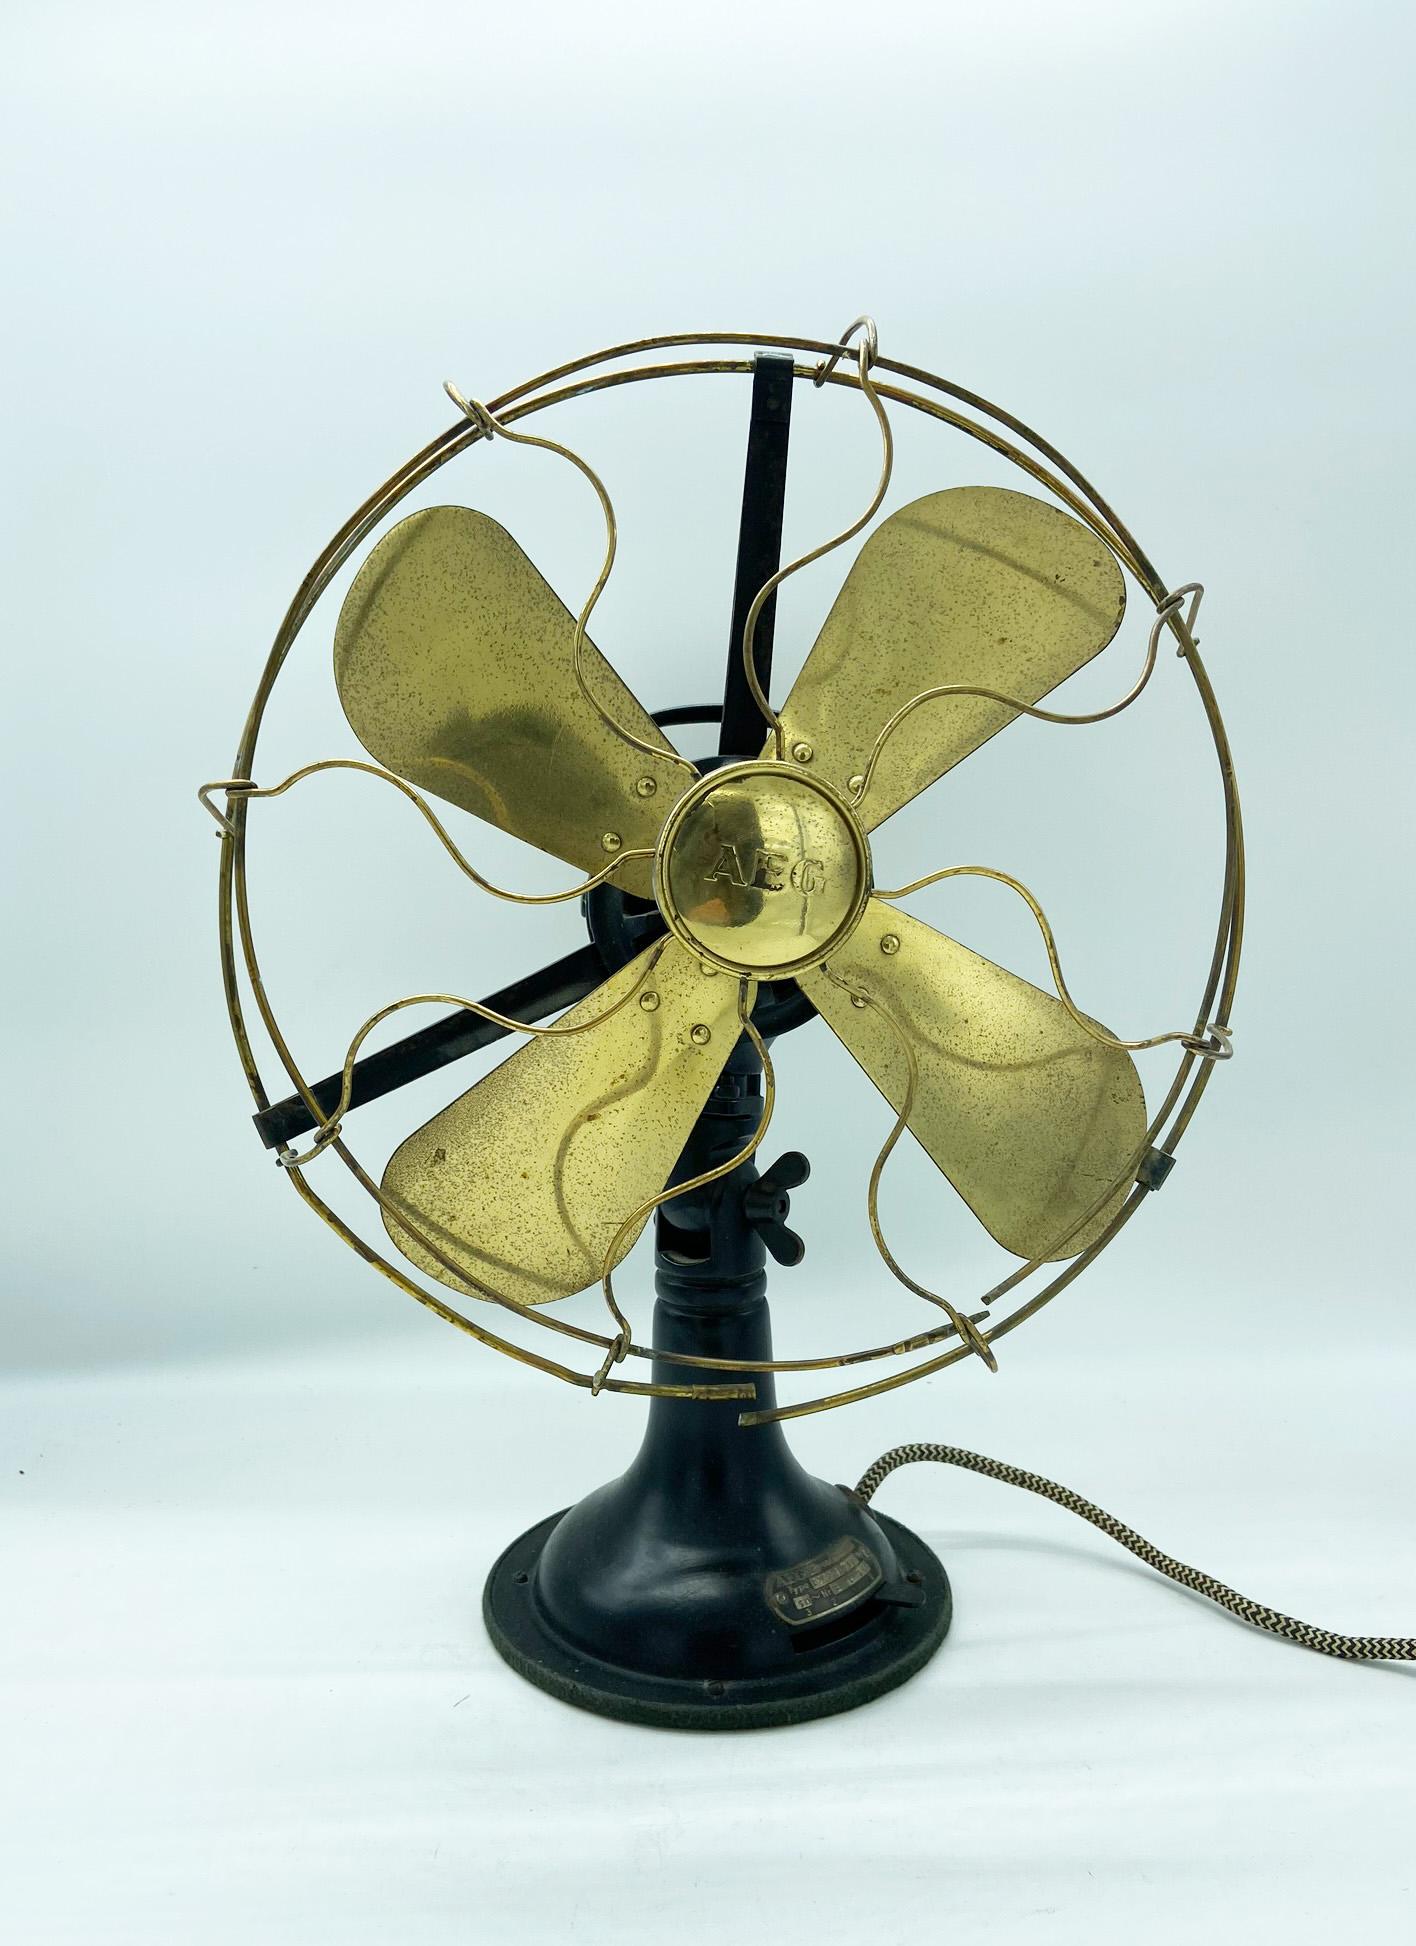 Beautiful and iconic AEG model NOVU2 table fan in perfect condition, designed by architect Peter Behrens in 1908 for the Allgemeine Elektricitats Gesellshaft (A.E.G). Peter Behrens has been appointed AEG Artistic Consultant. And for his work at AEG,